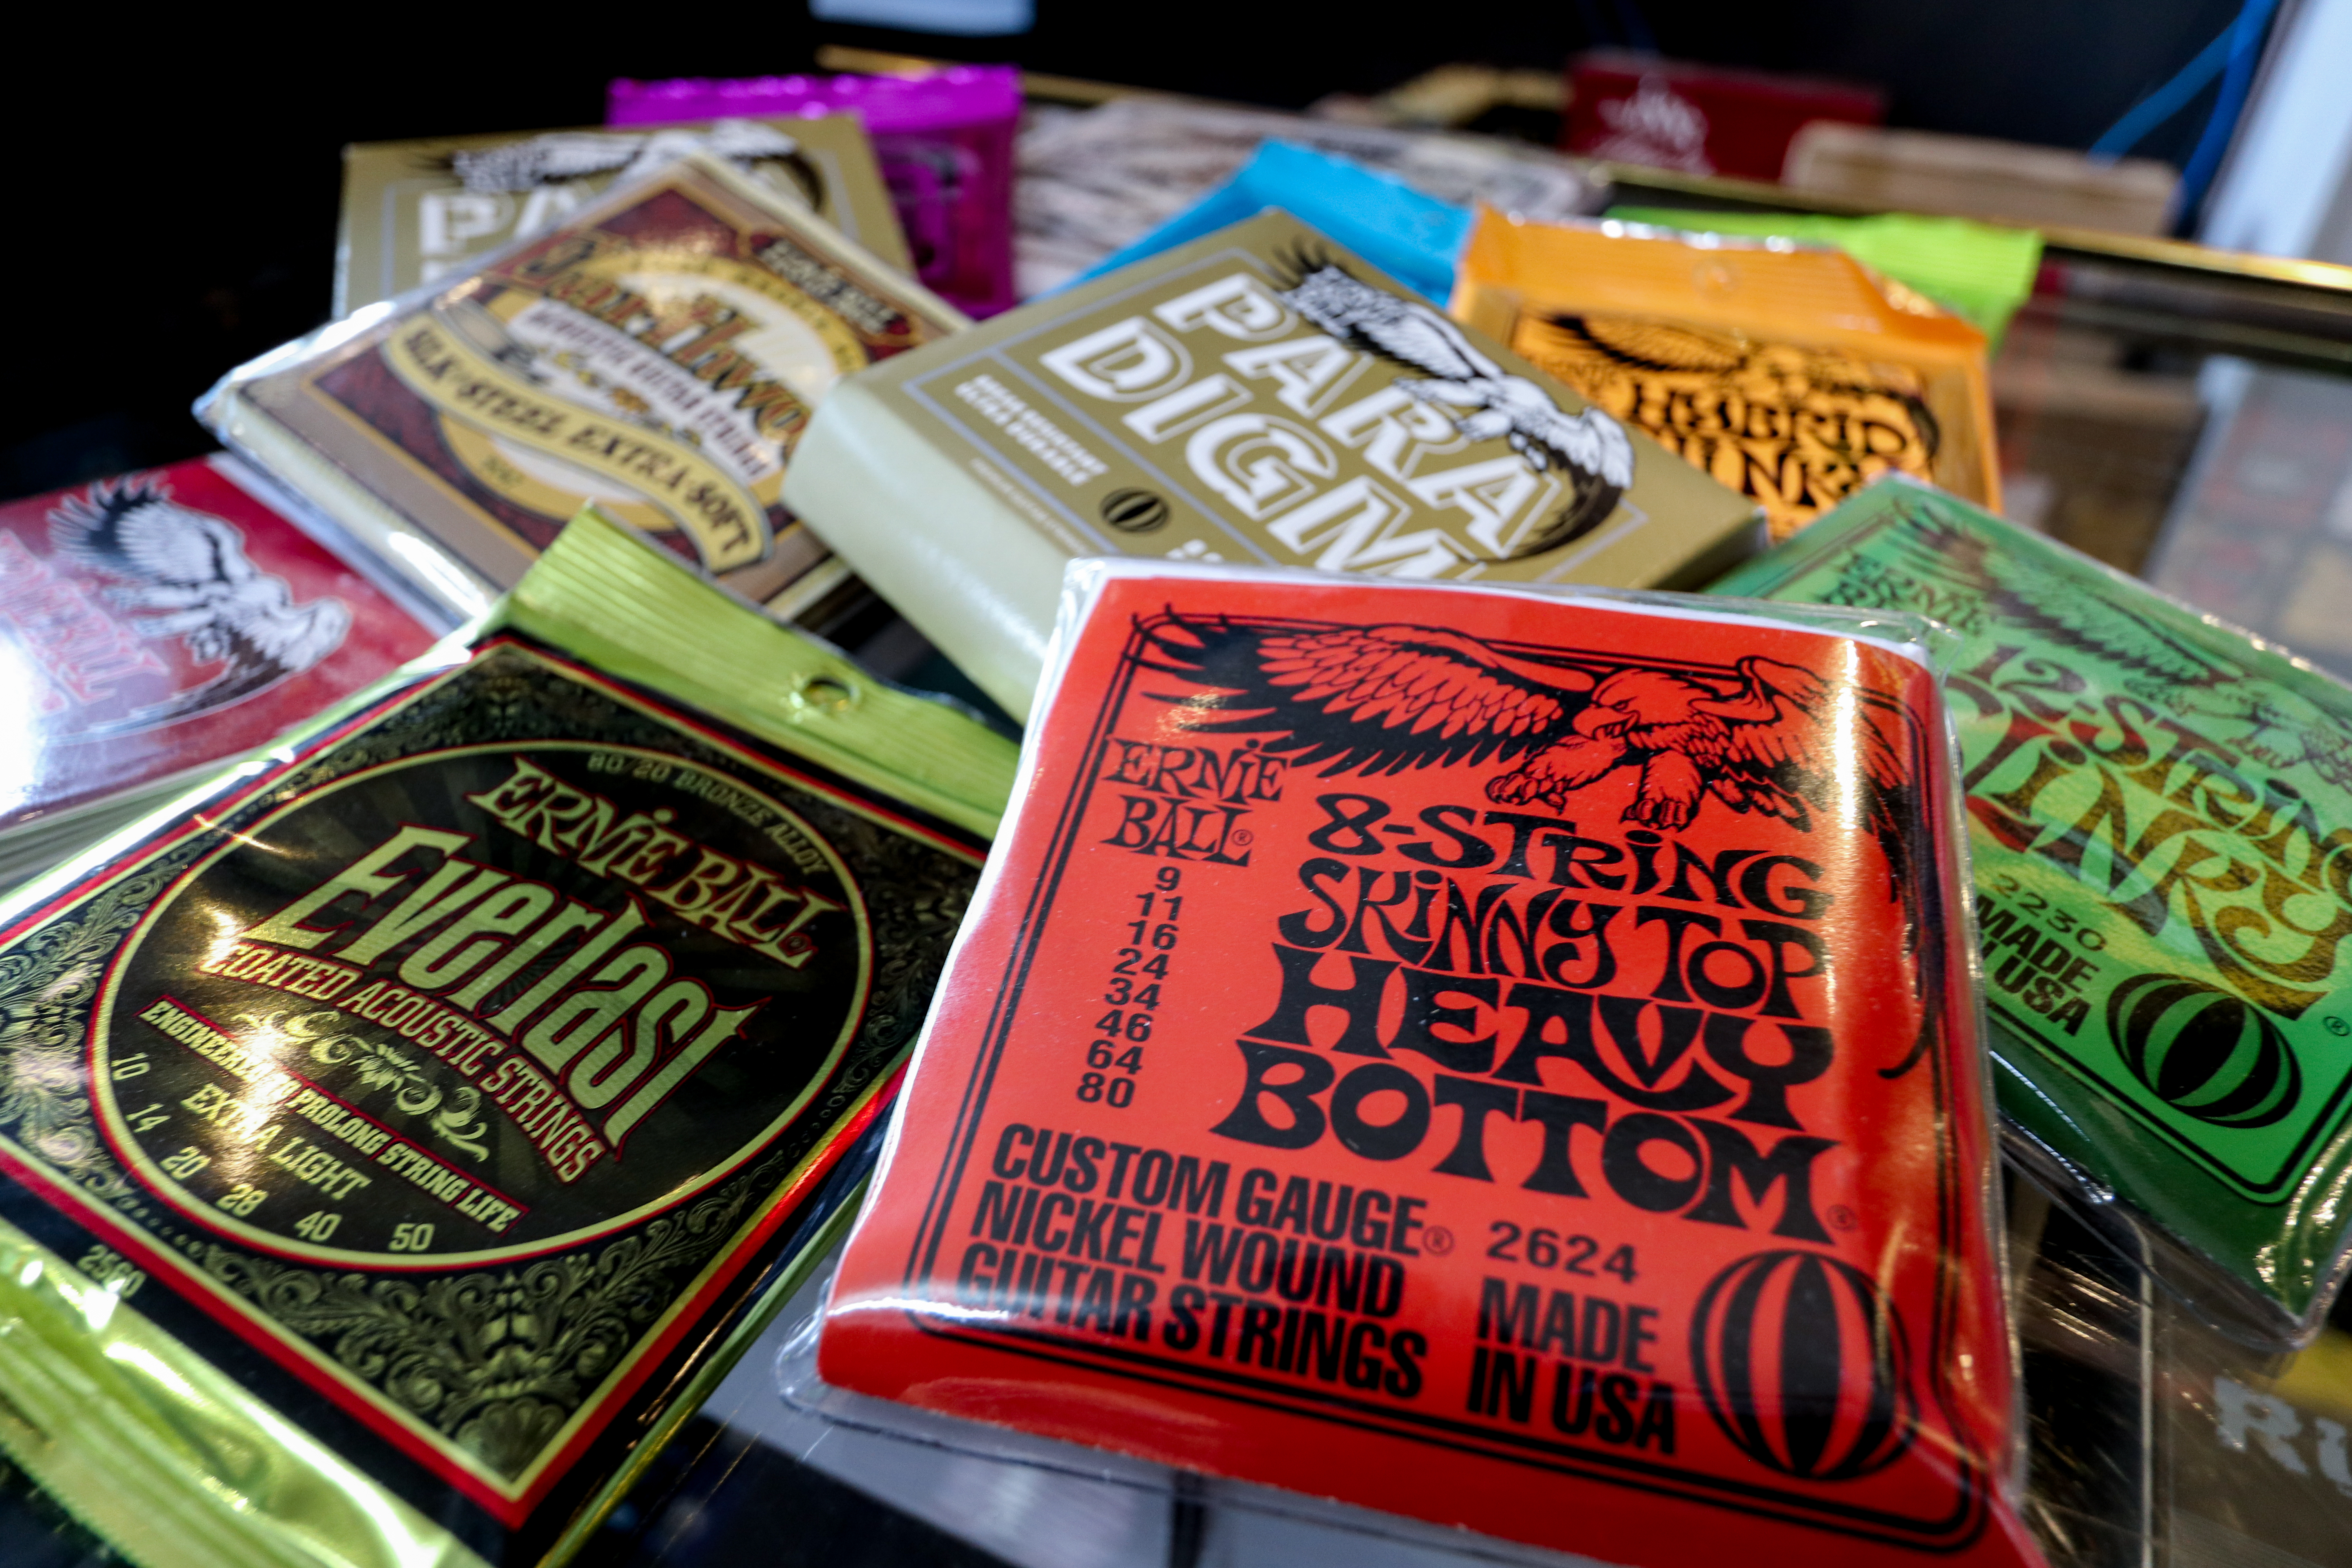 Pile of Ernie Ball string packets